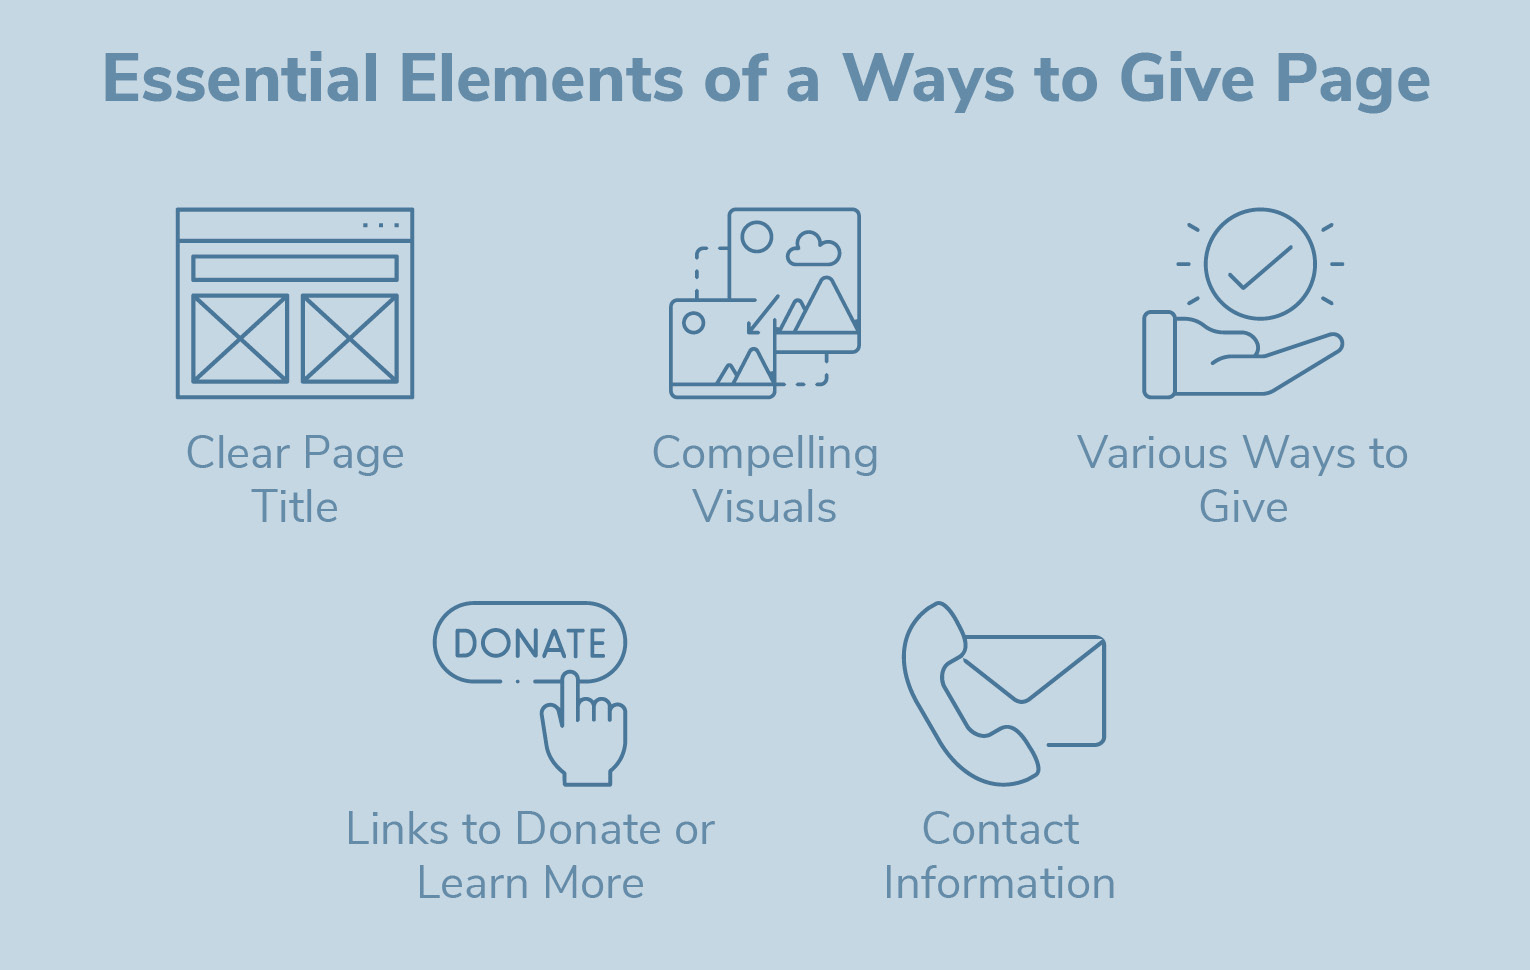 Learn more about the essential elements of Ways to Give pages for nonprofits: page titles, visuals, ways to give, links, and contact information